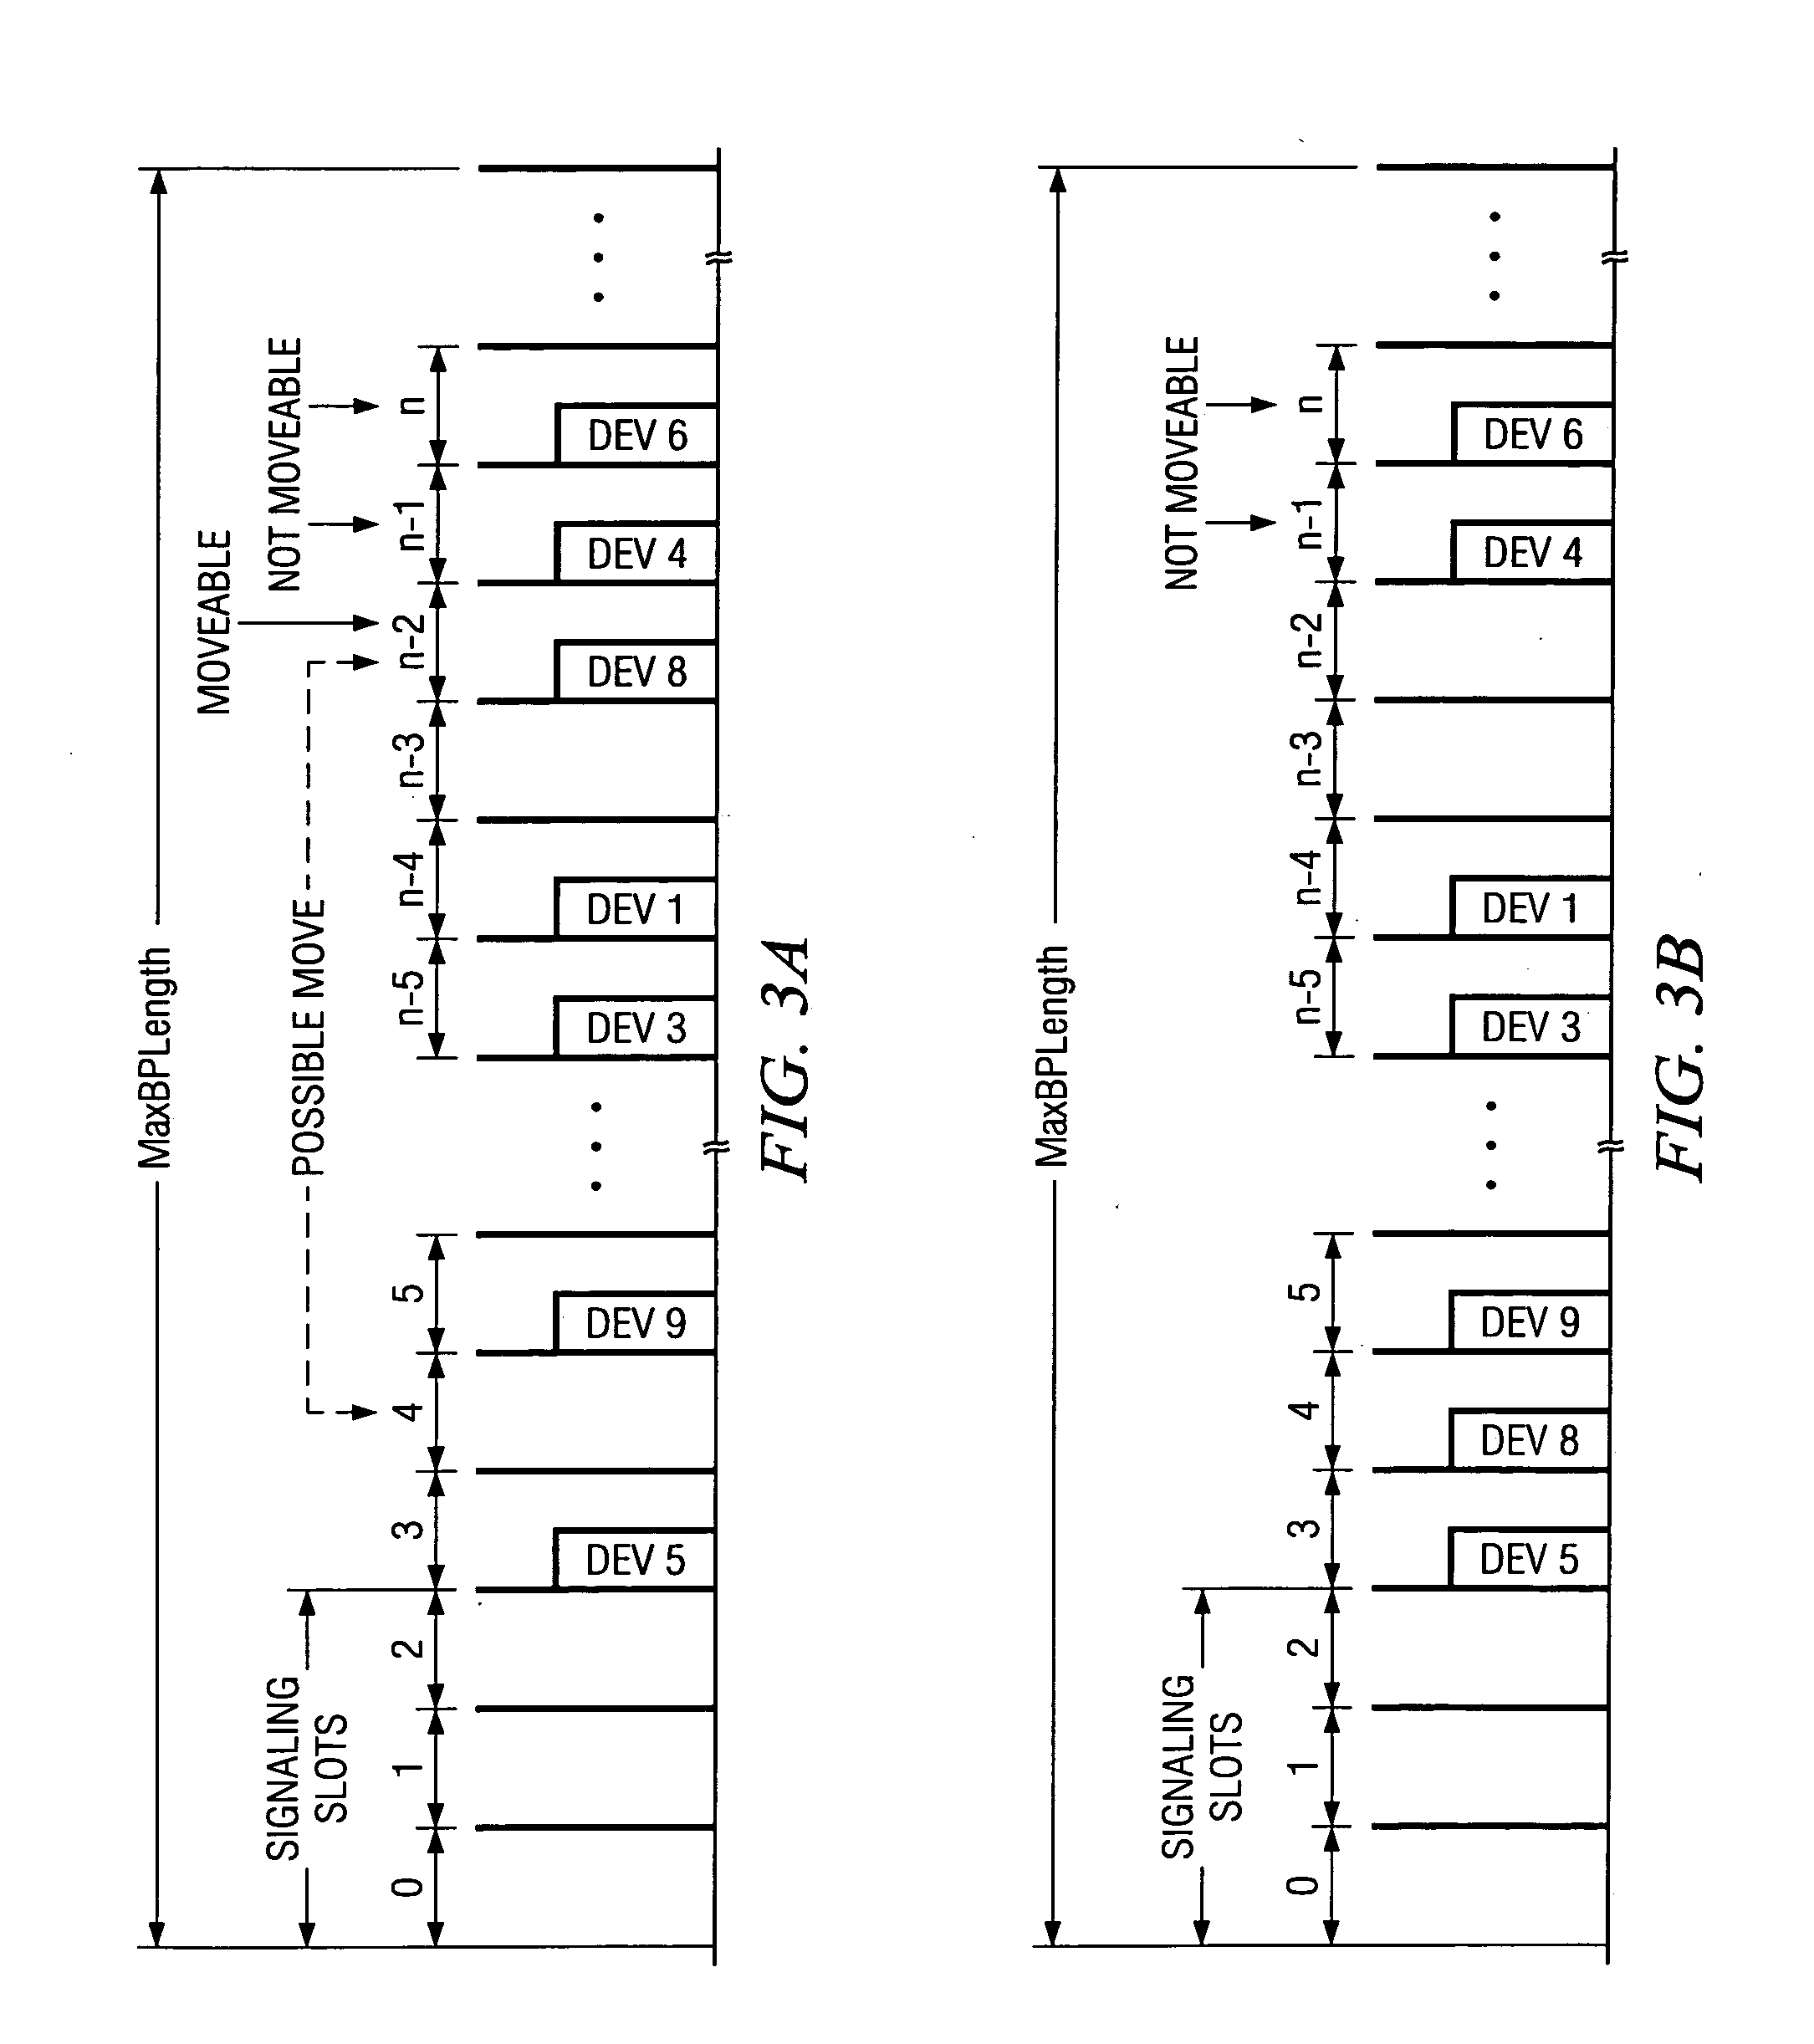 System and method for access and management of beacon periods in distributed wireless networks